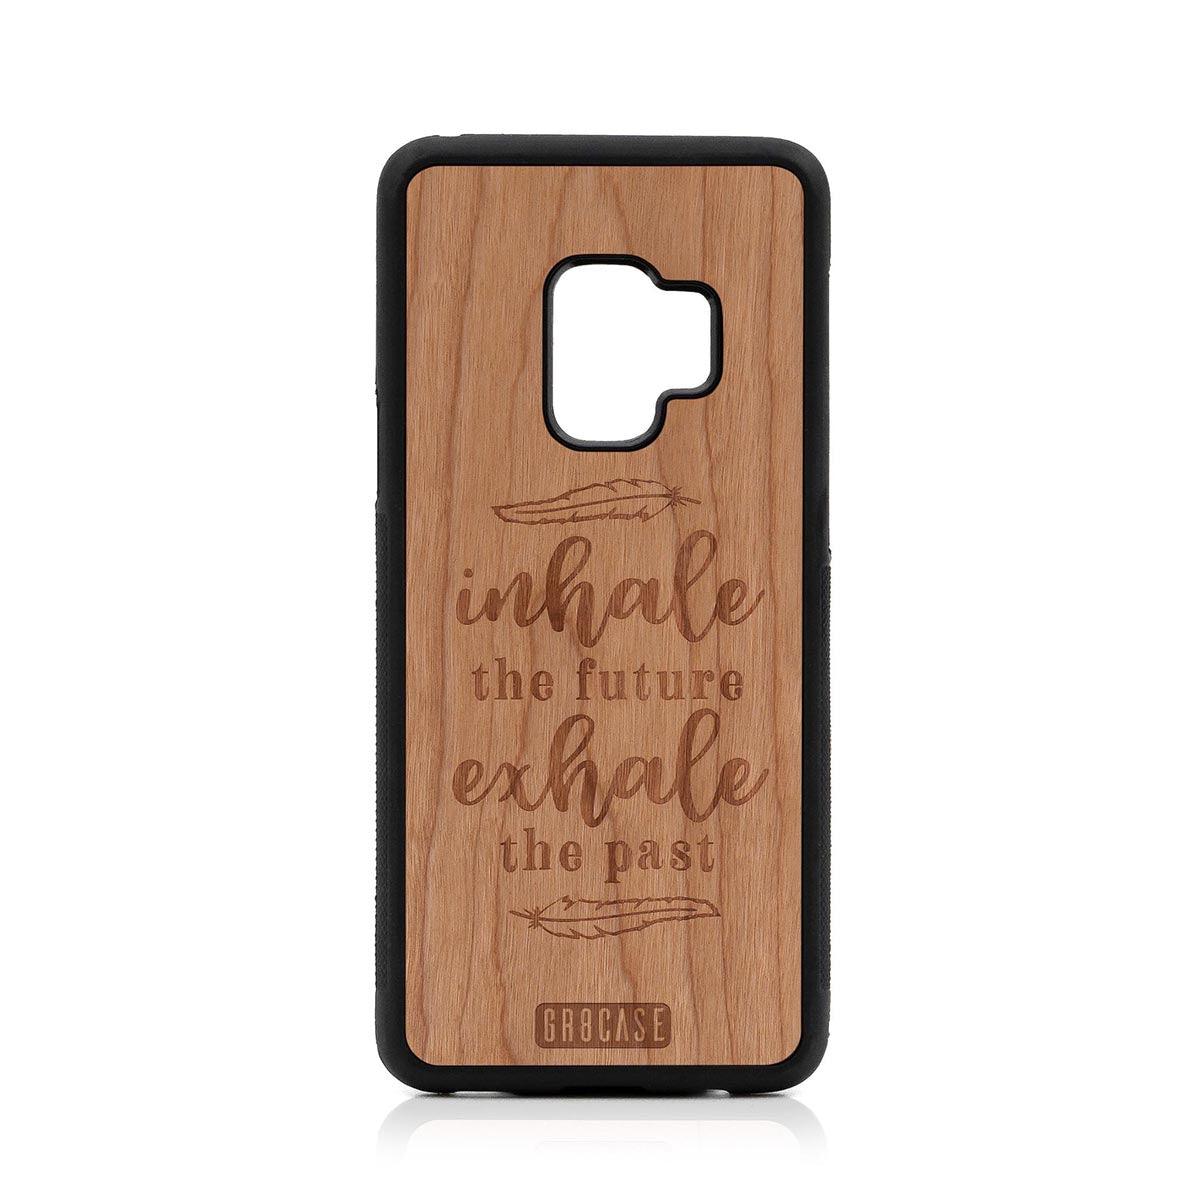 Inhale The Future Exhale The Past Design Wood Case Samsung Galaxy S9 by GR8CASE